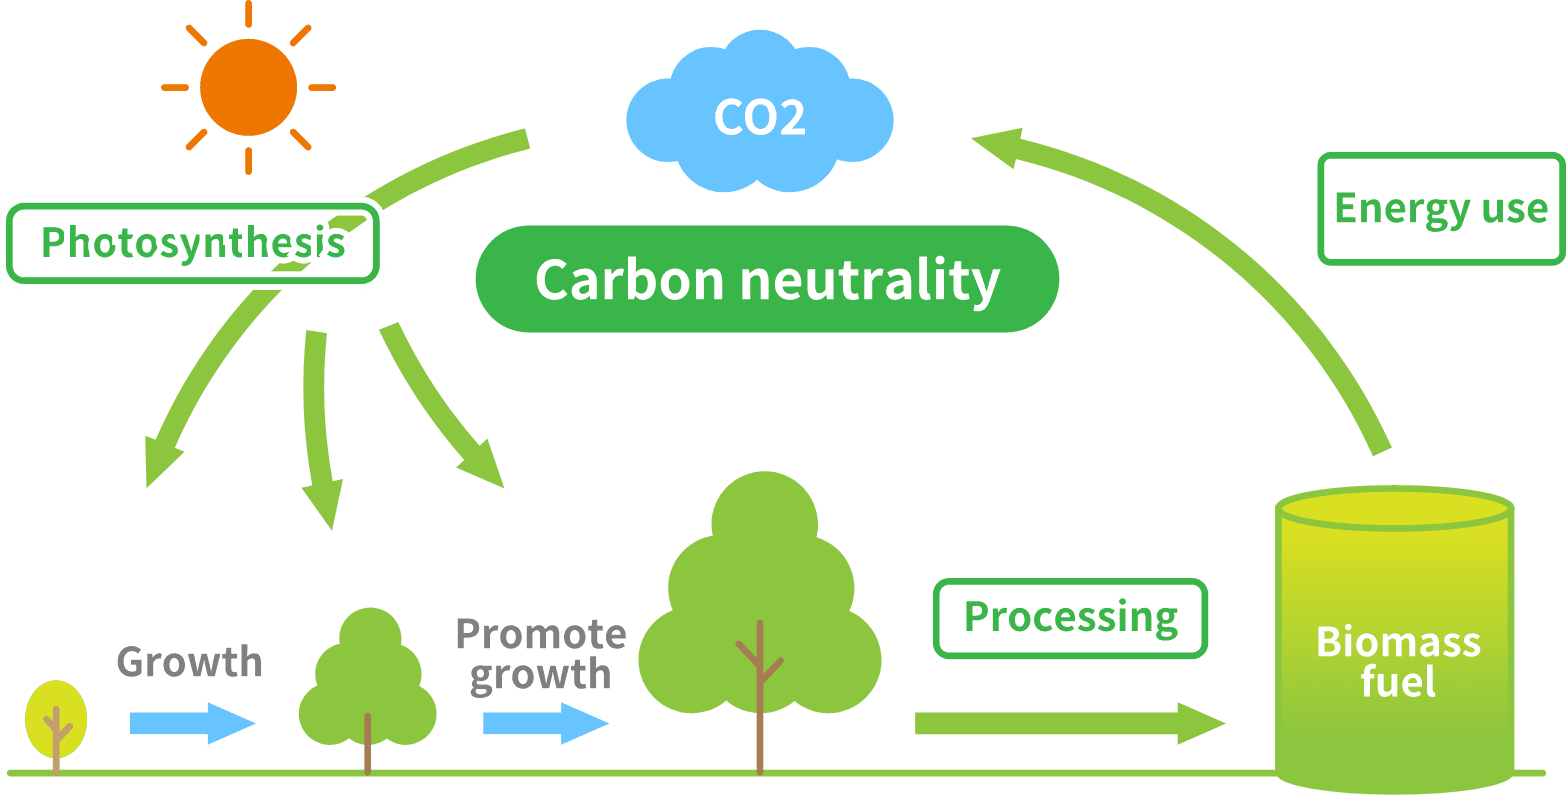 Contributing to global warming prevention and zero carbon society through biomass power generation